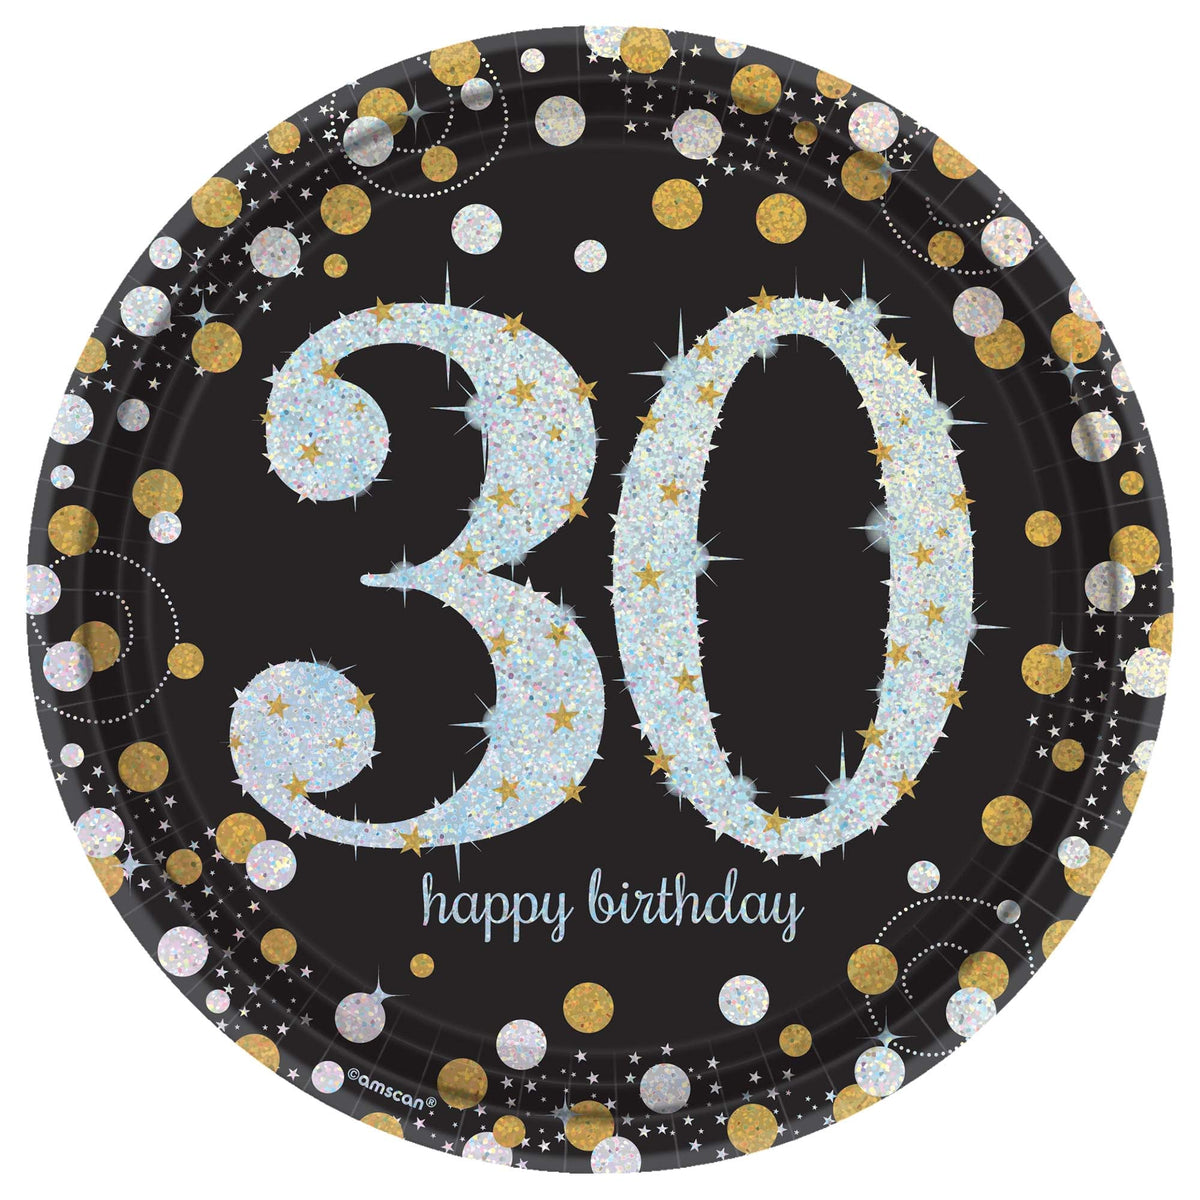 Sparkling Celebration 30th Birthday Round 9" Prismatic Plates Package of 8